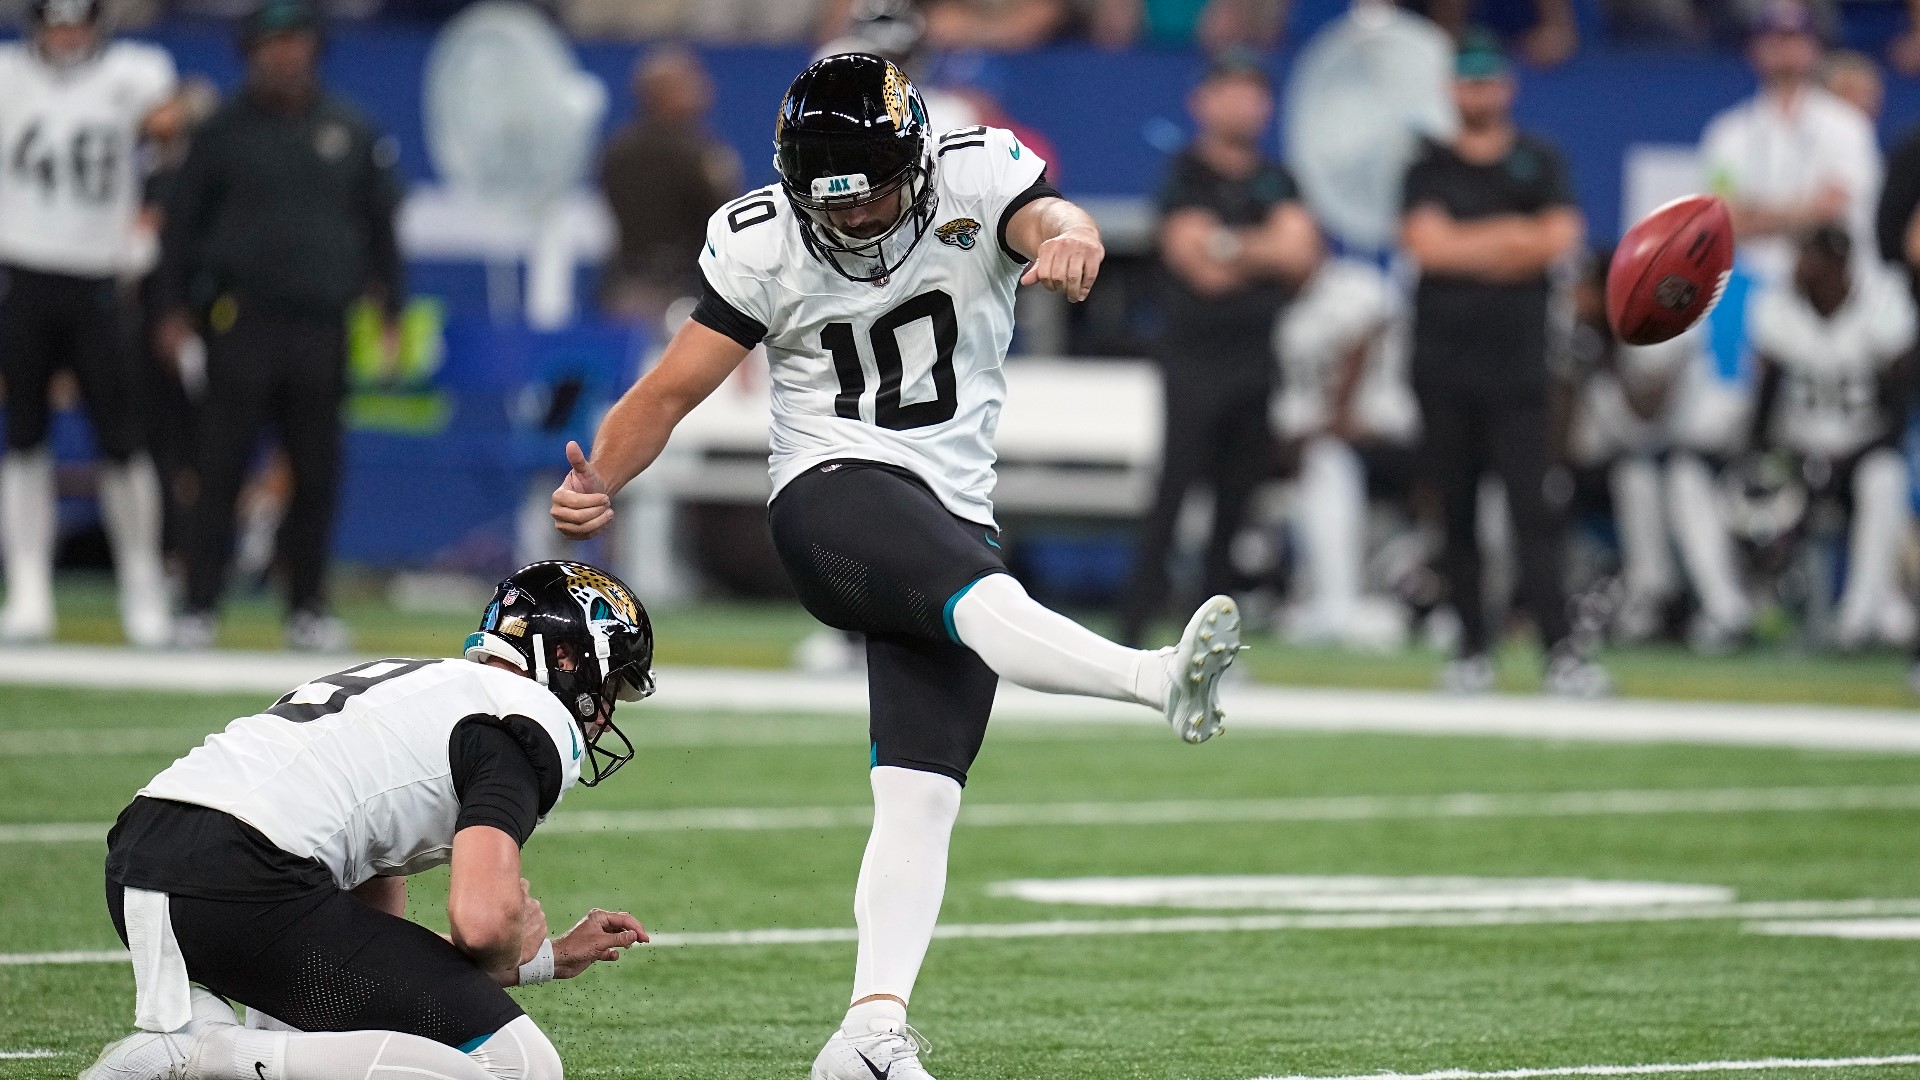 Place kicker, Brandon McManus is in his 10th season as a kicker for the NFL. This is his first season with the Jaguars.